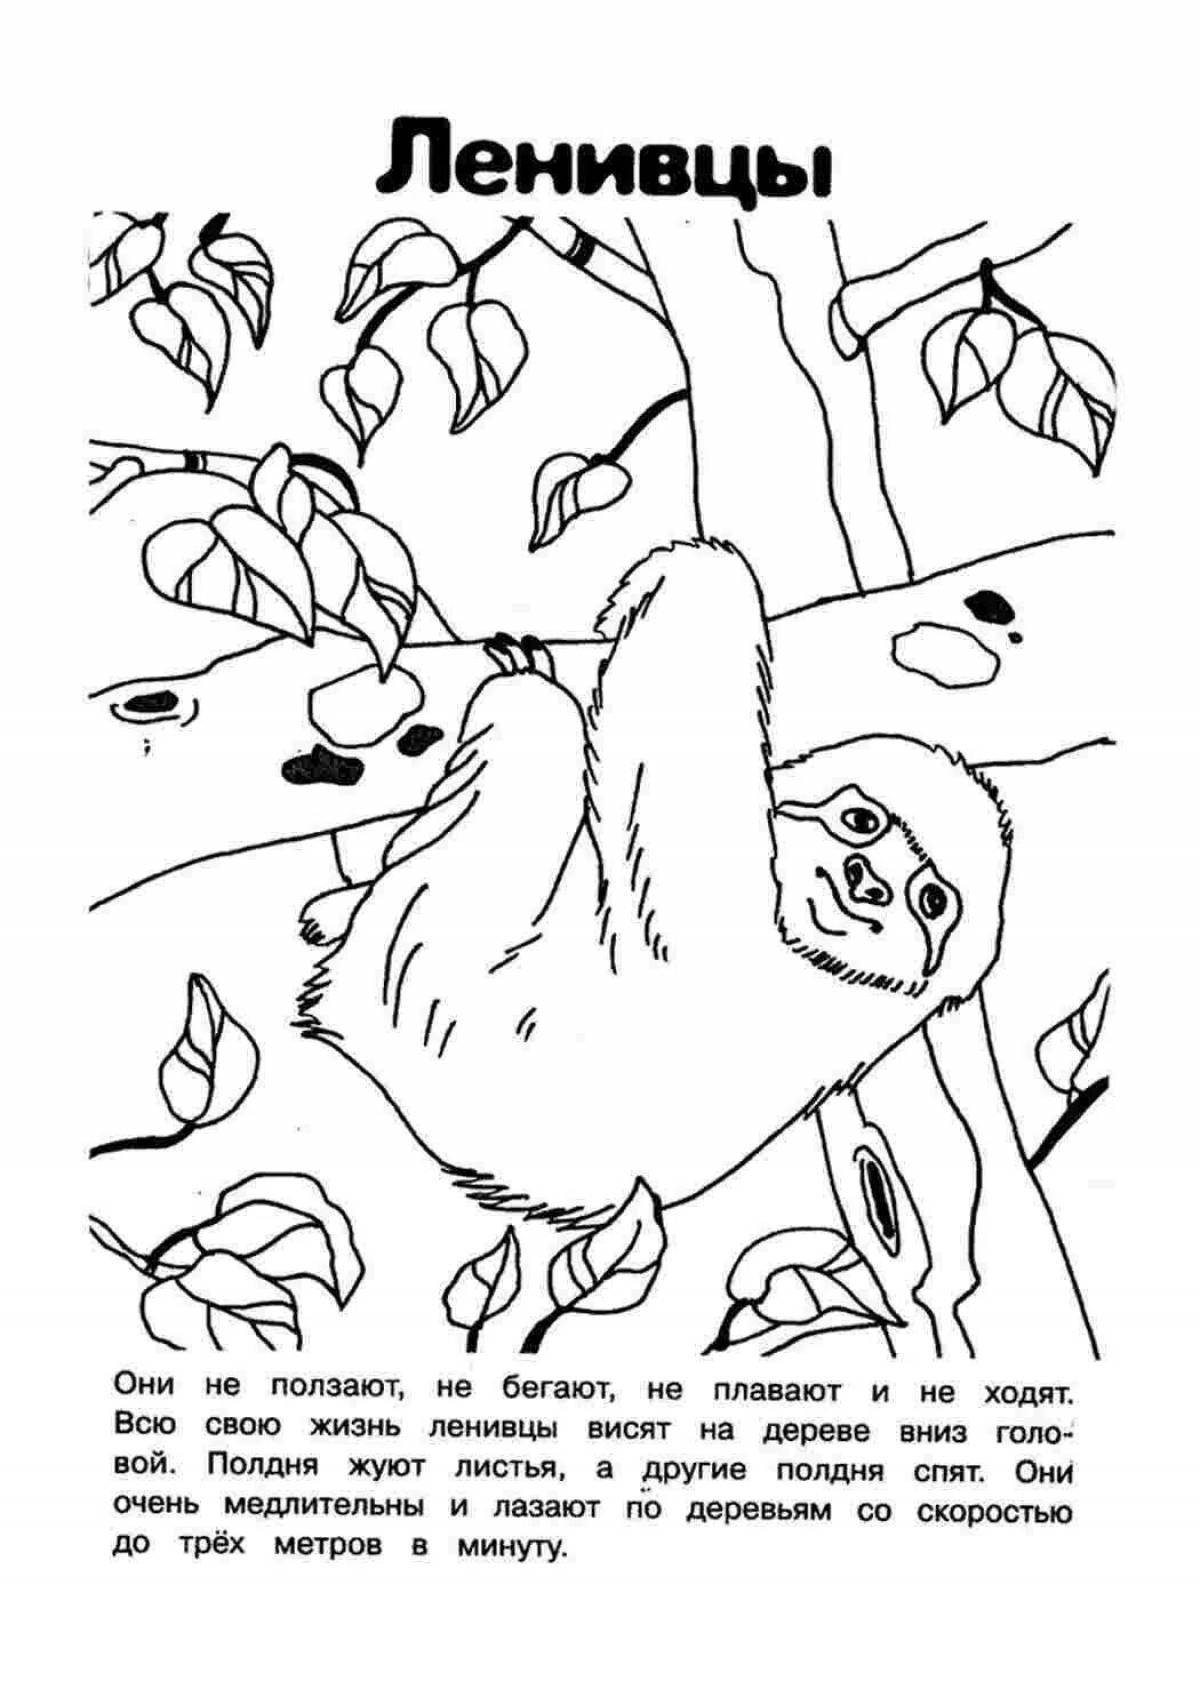 Stimulating red coloring book for toddlers